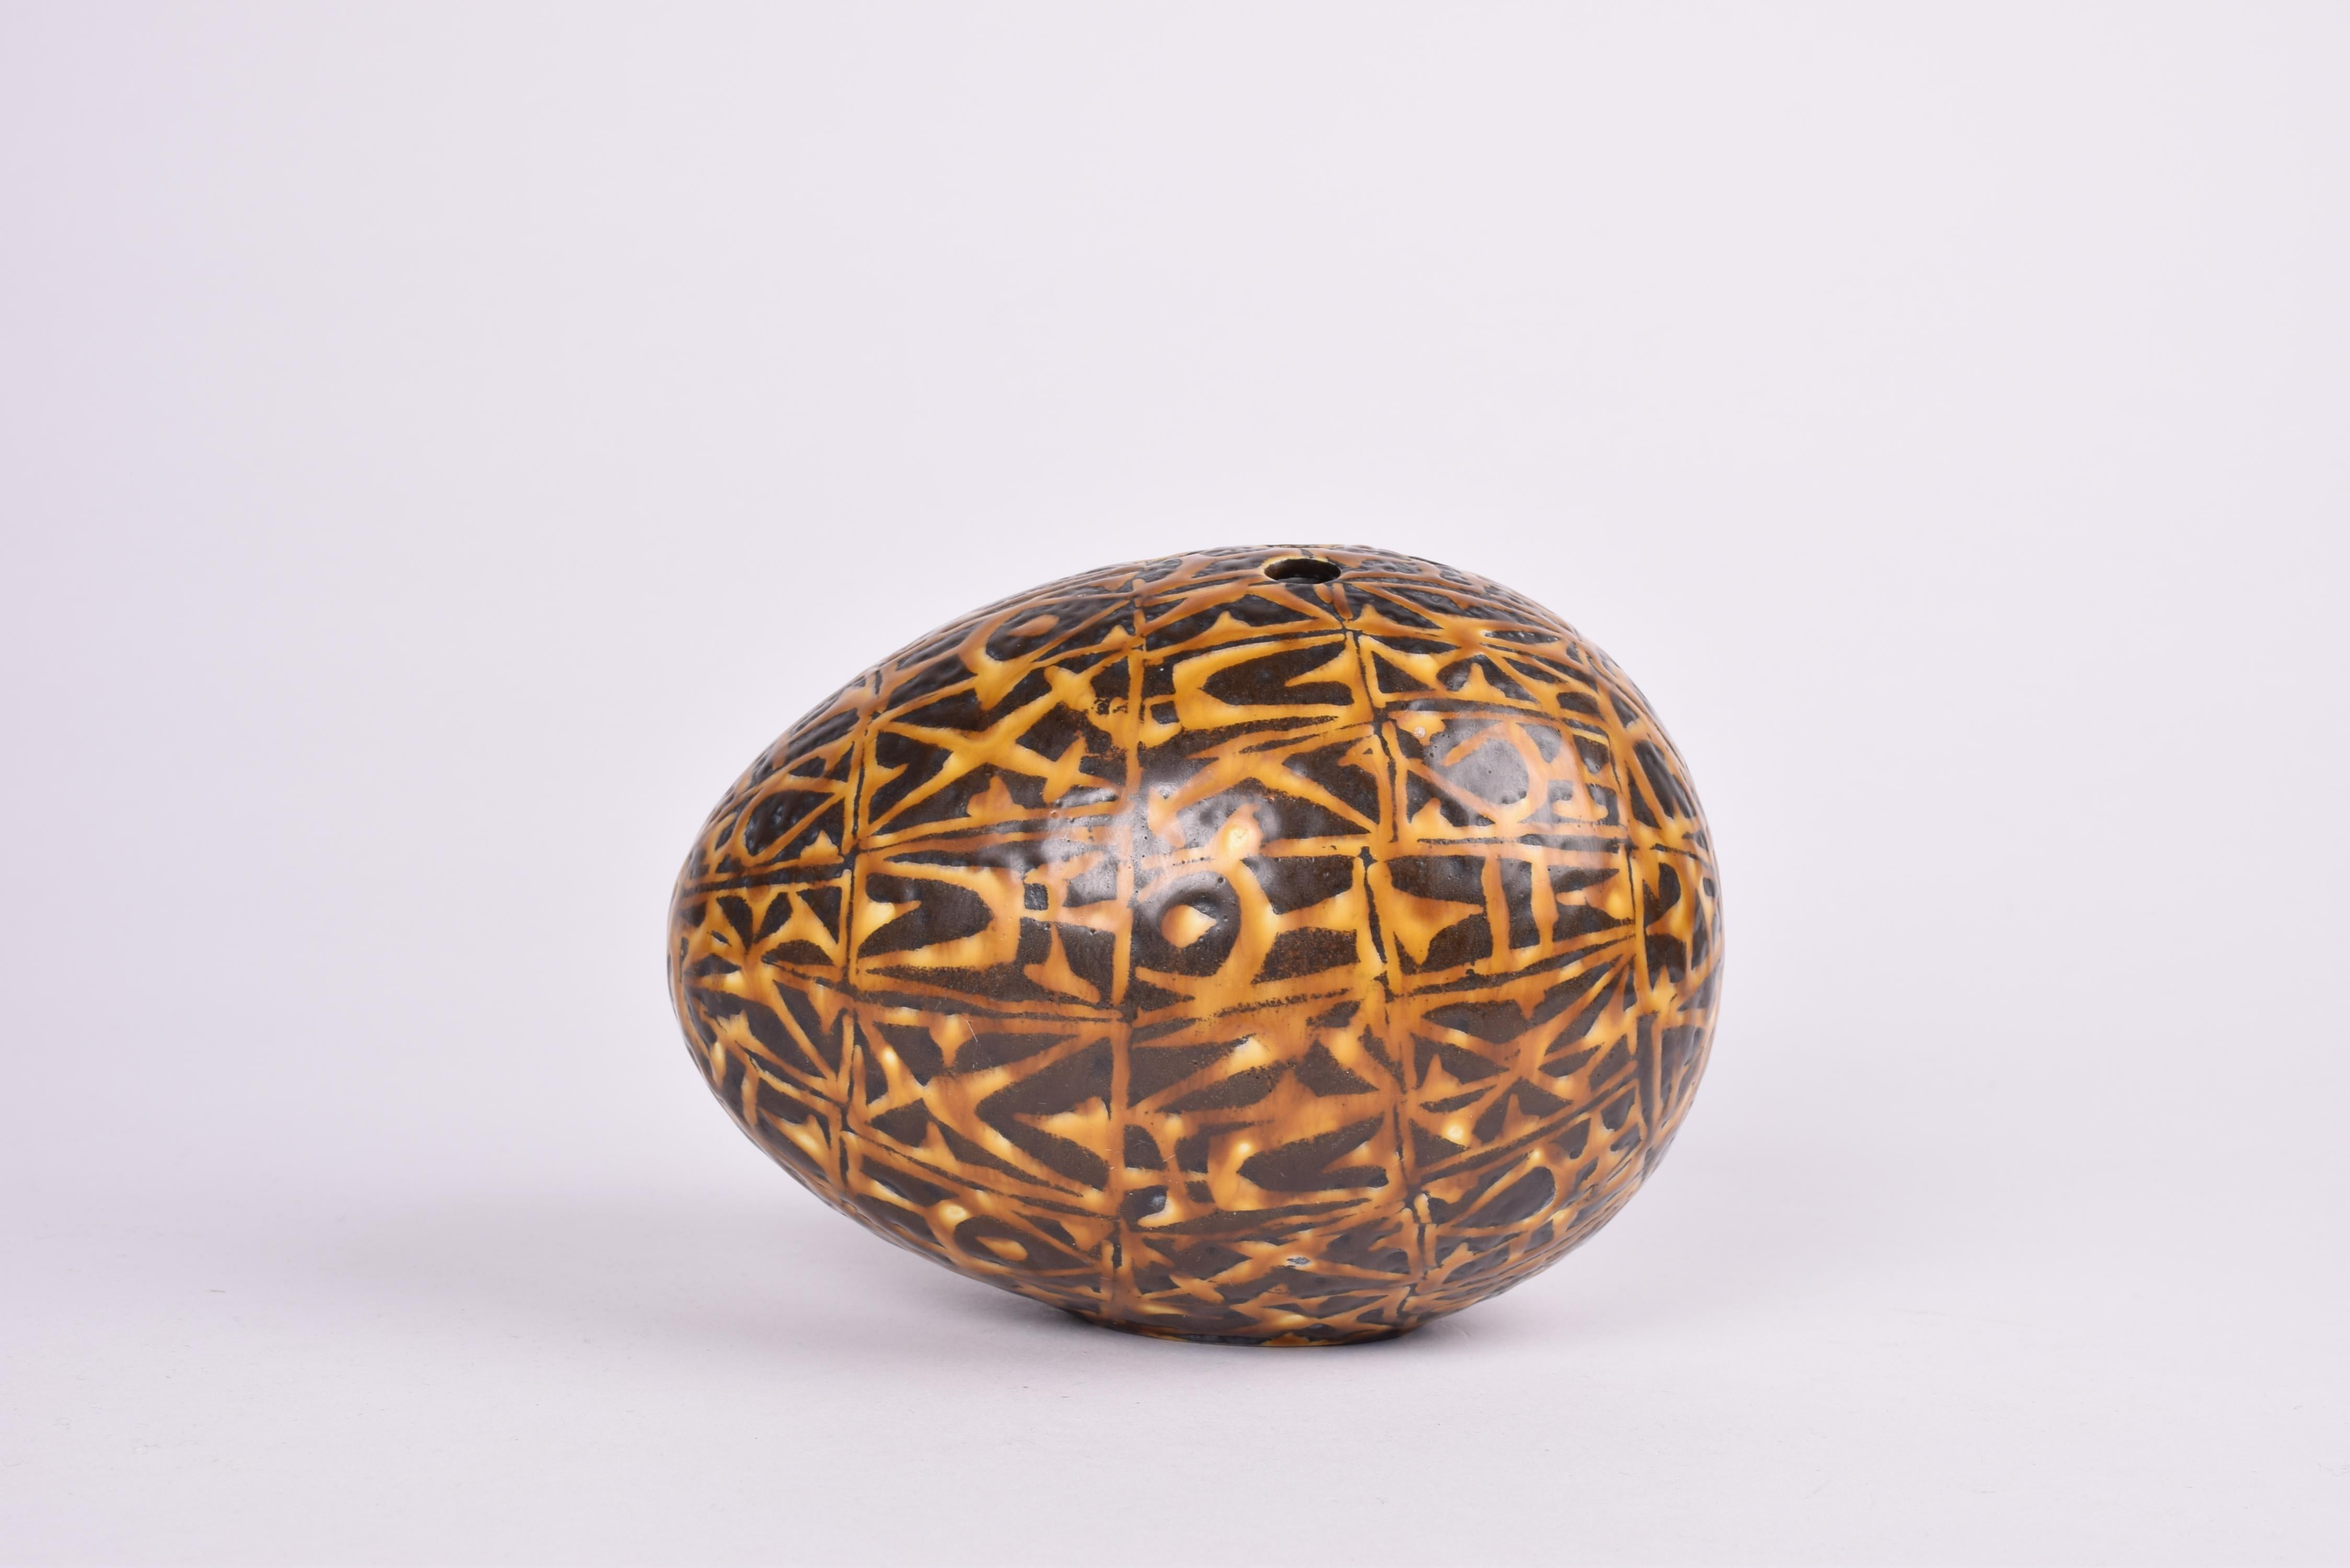 This is a very rare large sized egg shaped vase designed by Nils Thorsson for the Royal Copenhagen 